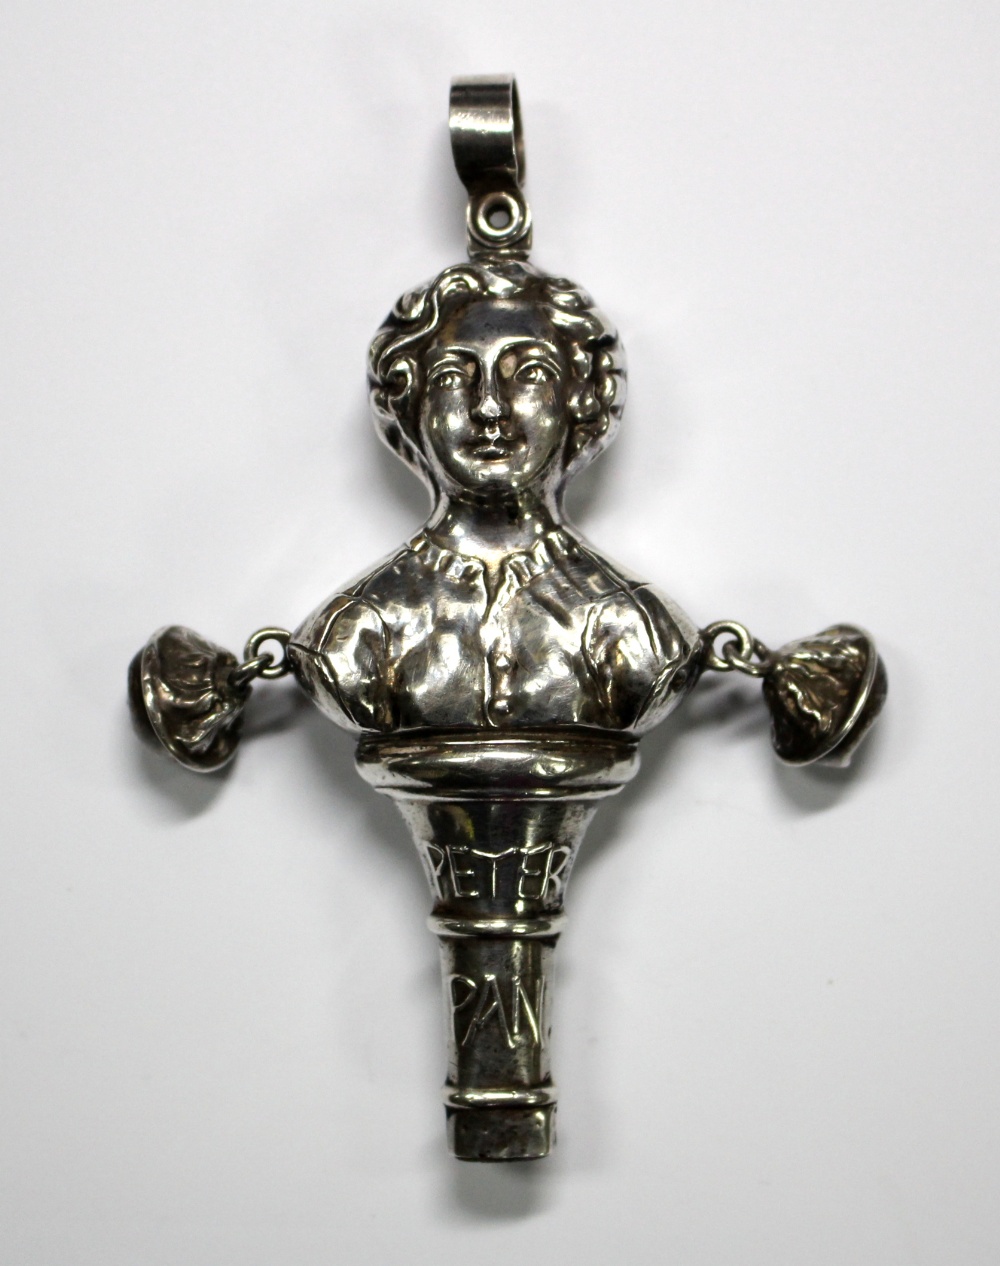 A Victorian silver 'Peter Pan' rattle and teether, by Crisford and Norris, Birmingham 1902, his